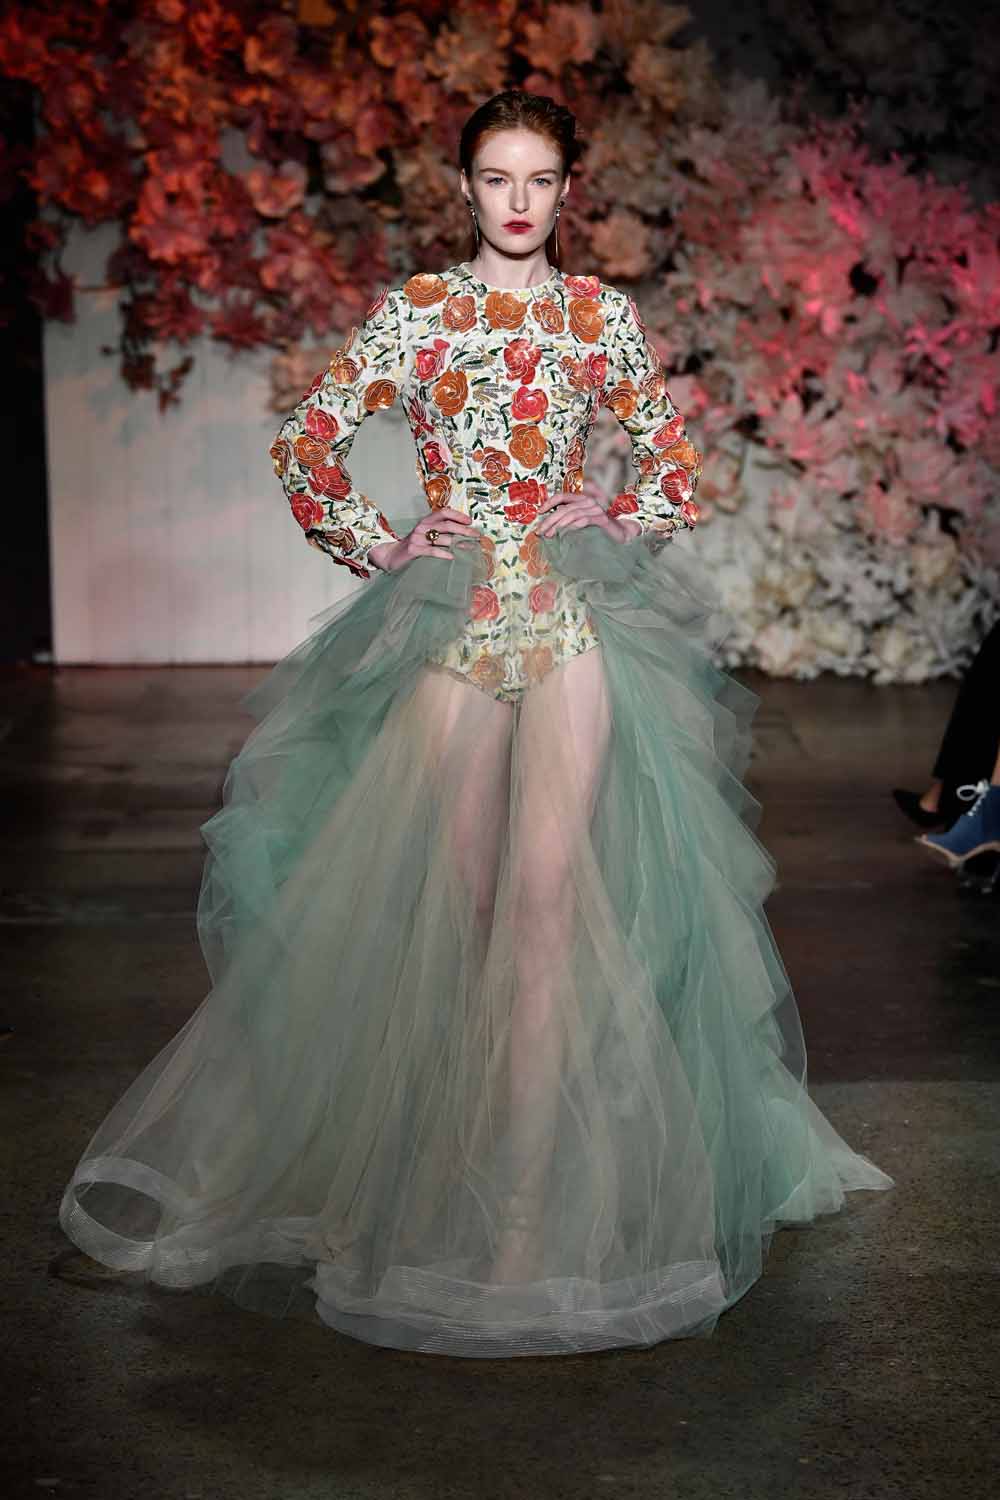 SYDNEY, AUSTRALIA - MAY 15: A model walks the runway during the Steven Khalil show at Mercedes-Benz Fashion Week Resort 18 Collections at Elston Room on May 15, 2017 in Sydney, Australia. (Photo by Stefan Gosatti/Getty Images)